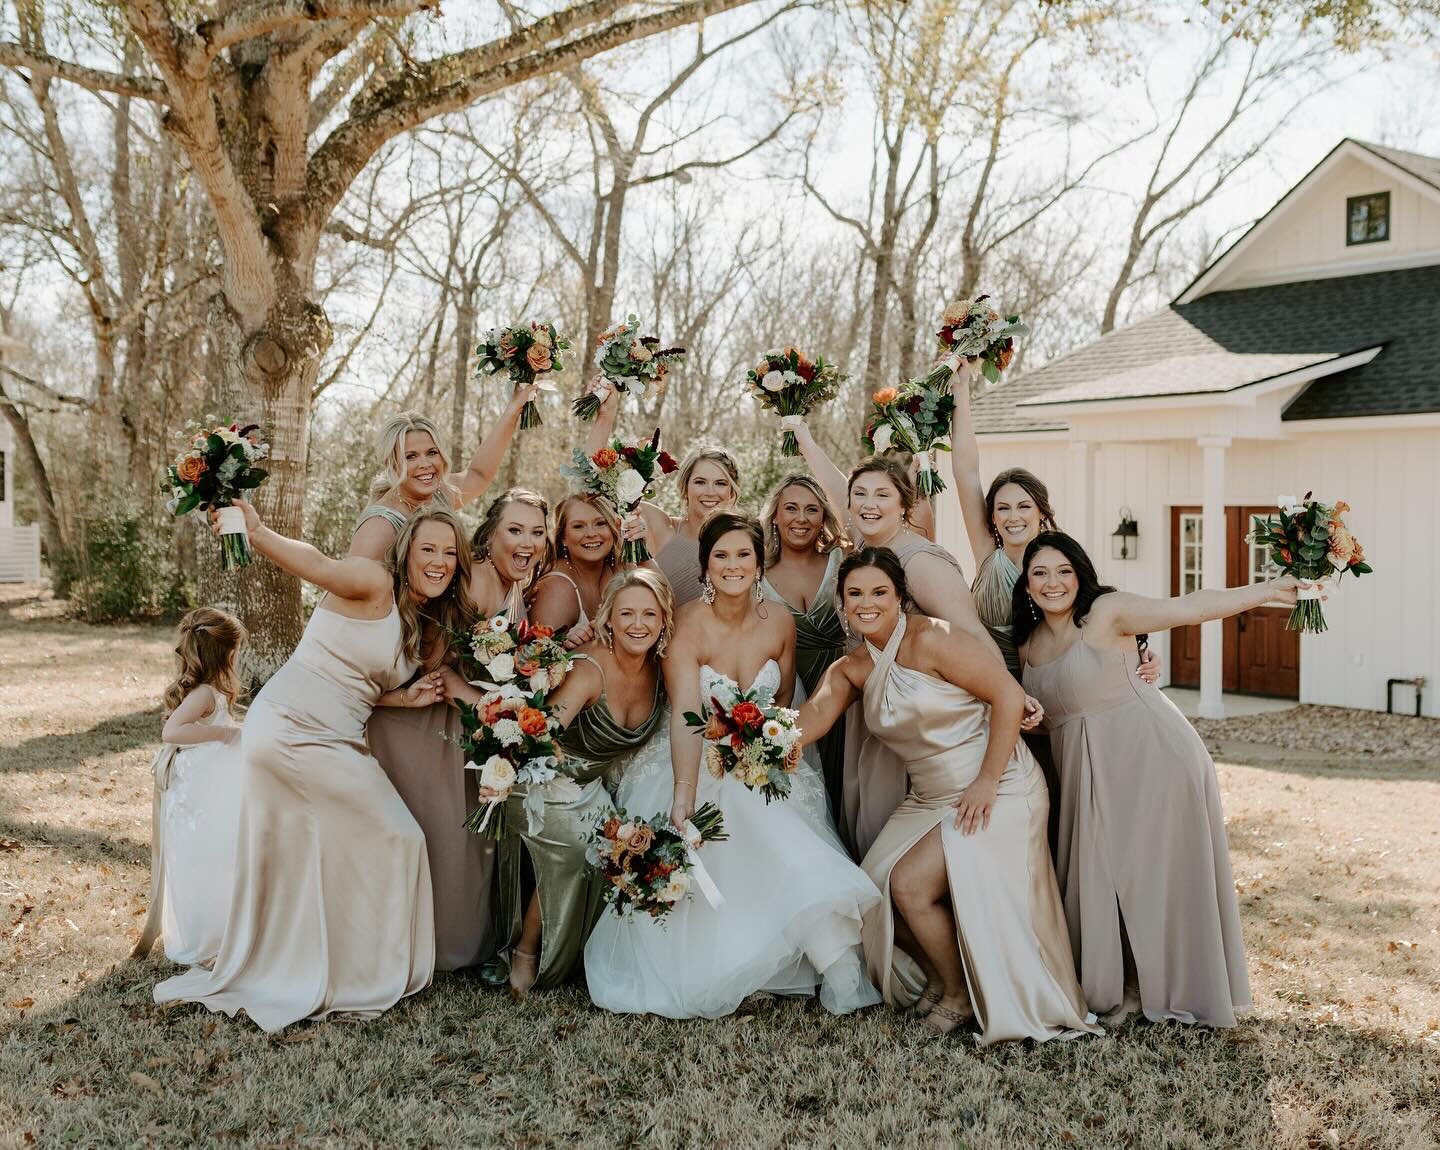 Not sure what colors to have your girls in on your wedding day? Use this post as inspo because Bridget and her girls nailed it🤩⁣
⁣
#bridesmaids #bridesmaid #bride #brideandbridesmaids #besties #bestfriends #bestfriend #bridesmaidinspiration #bridesm